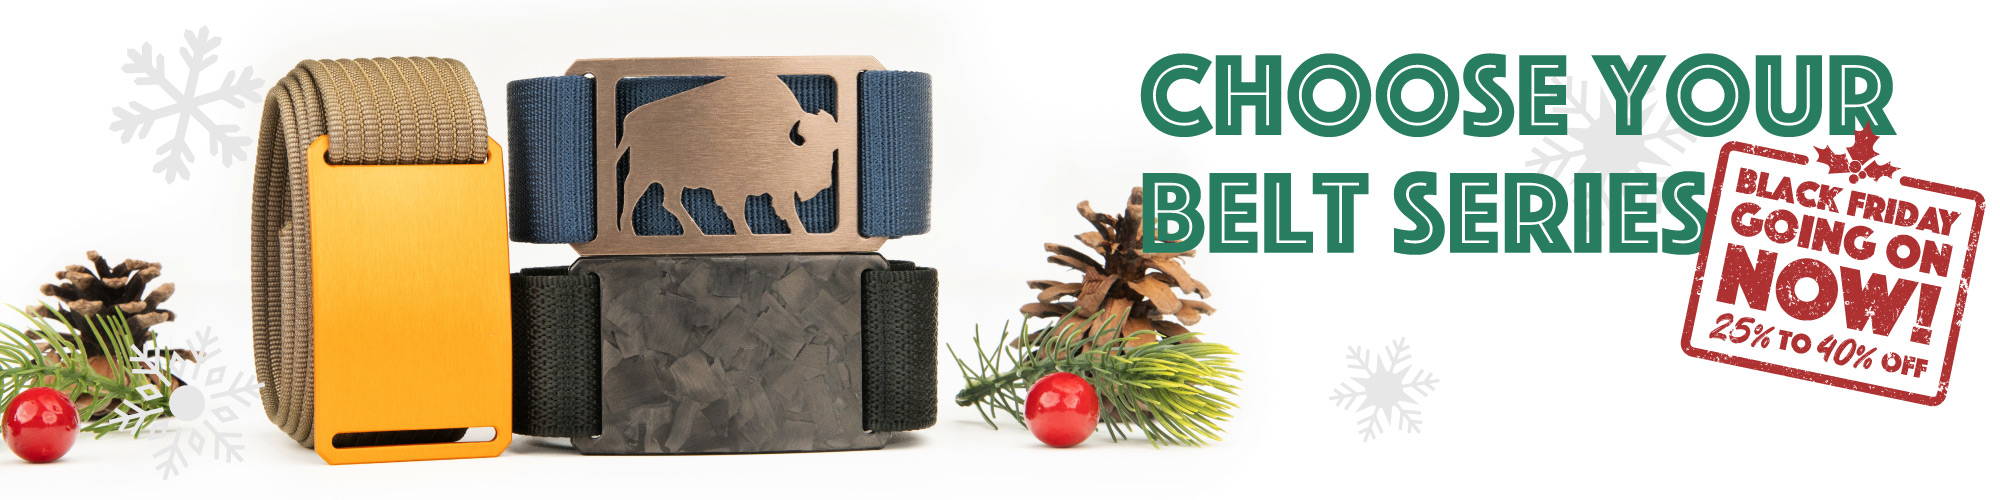 Choose Your Belt Series - Black Friday Going on Now 25% to 40% off!